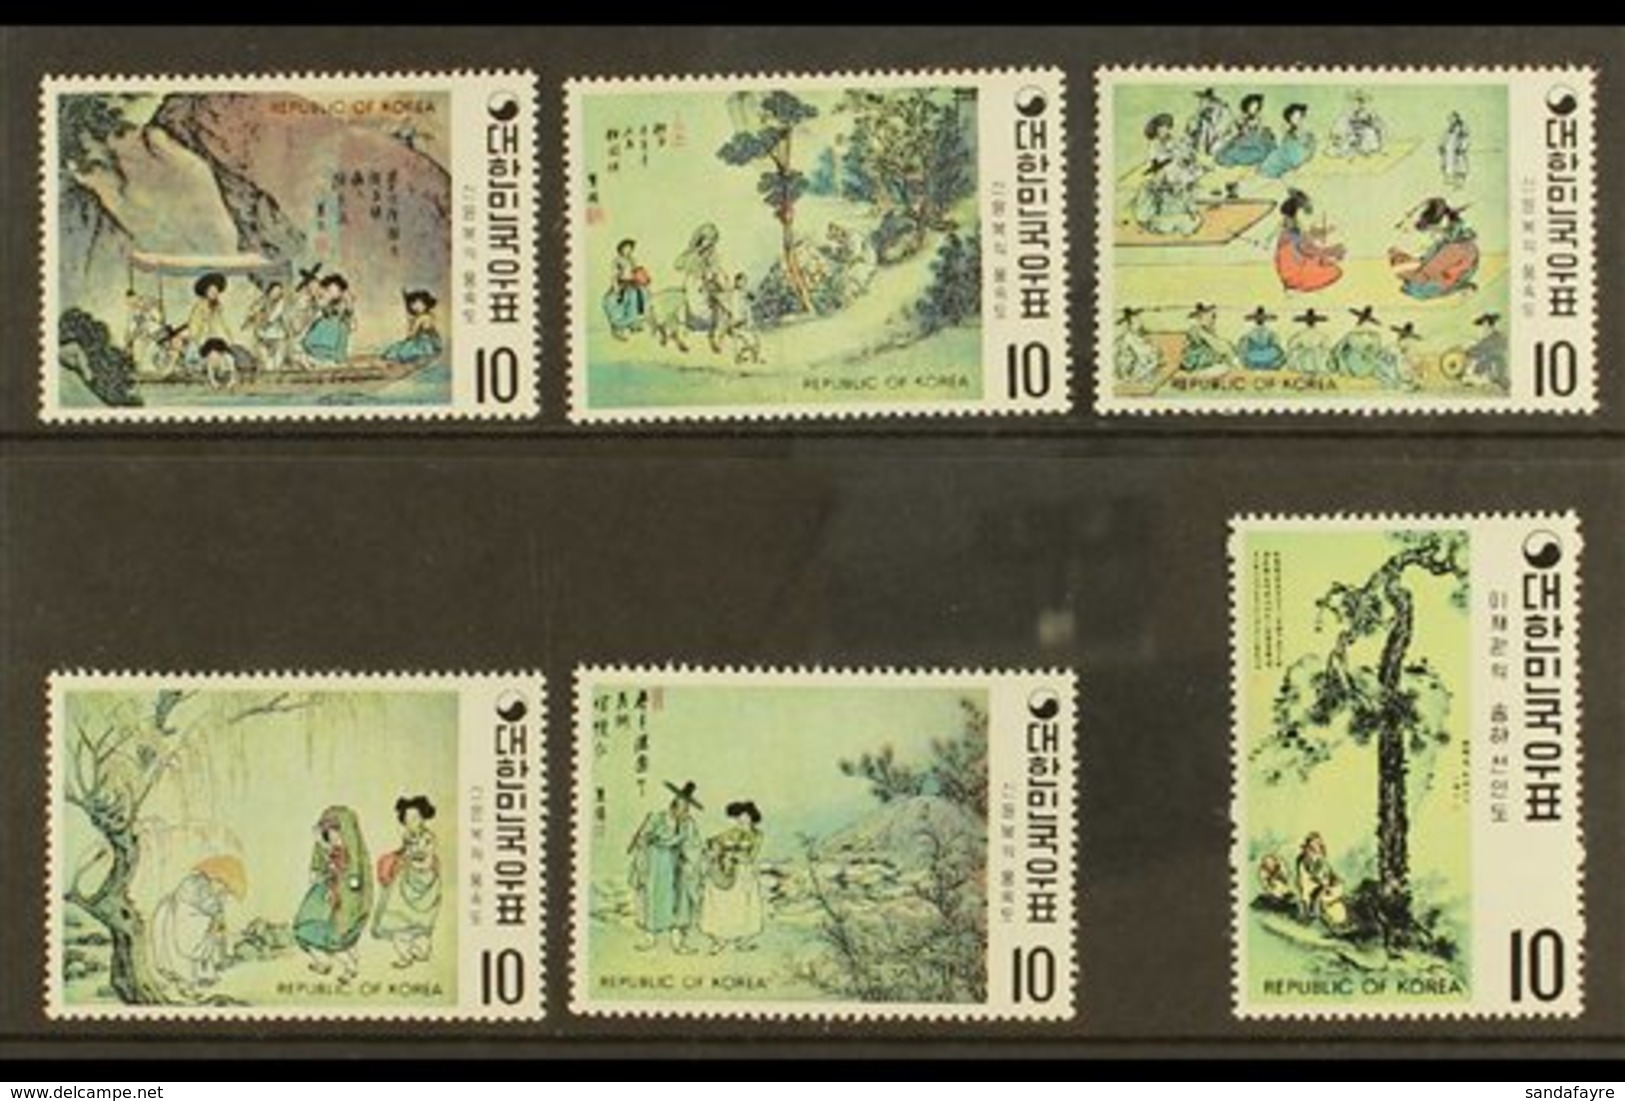 1971  Painting Fourth Series Complete Set & All Mini-sheets, SG 947/52 & MS 953, Fine Never Hinged Mint, Fresh. (6 Stamp - Corée Du Sud